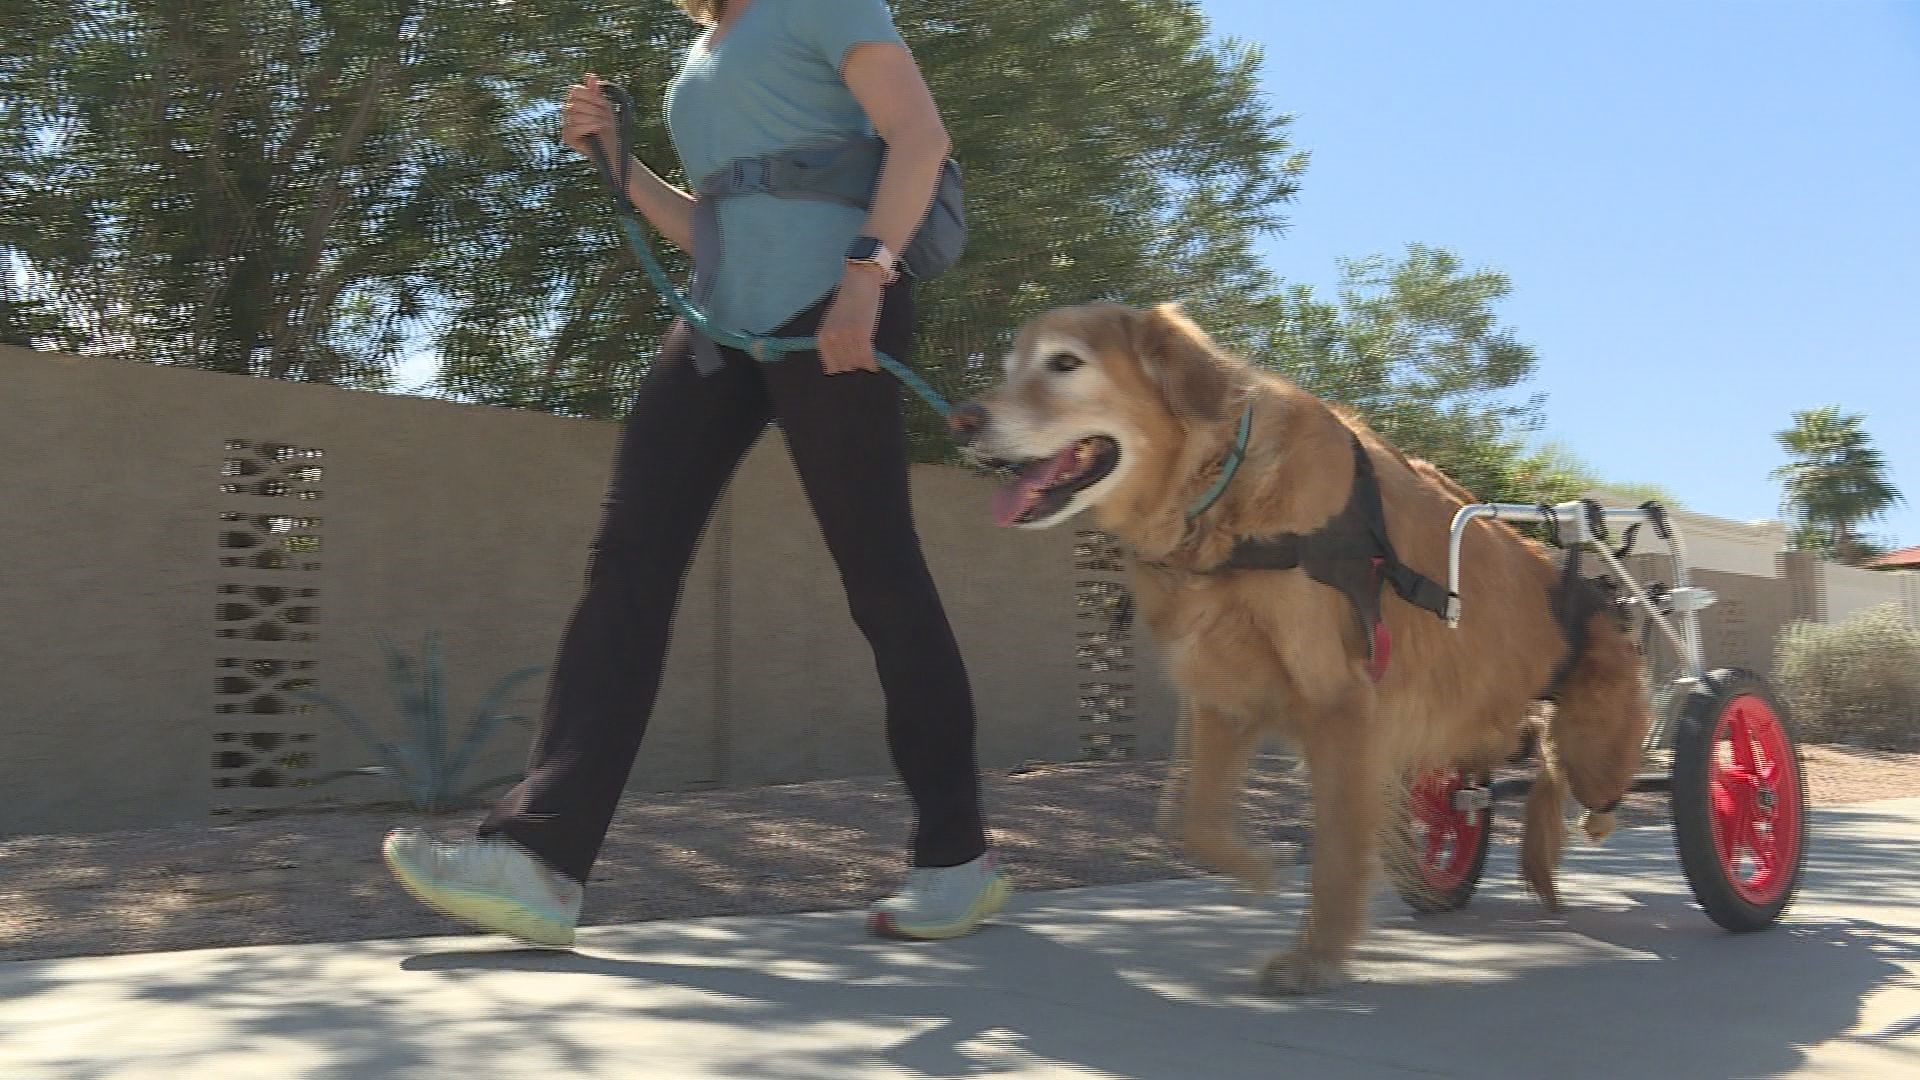 The Valley is home to a lot of active seniors who won't let age slow them down. Including one golden retriever who loves going on walks despite his disability.